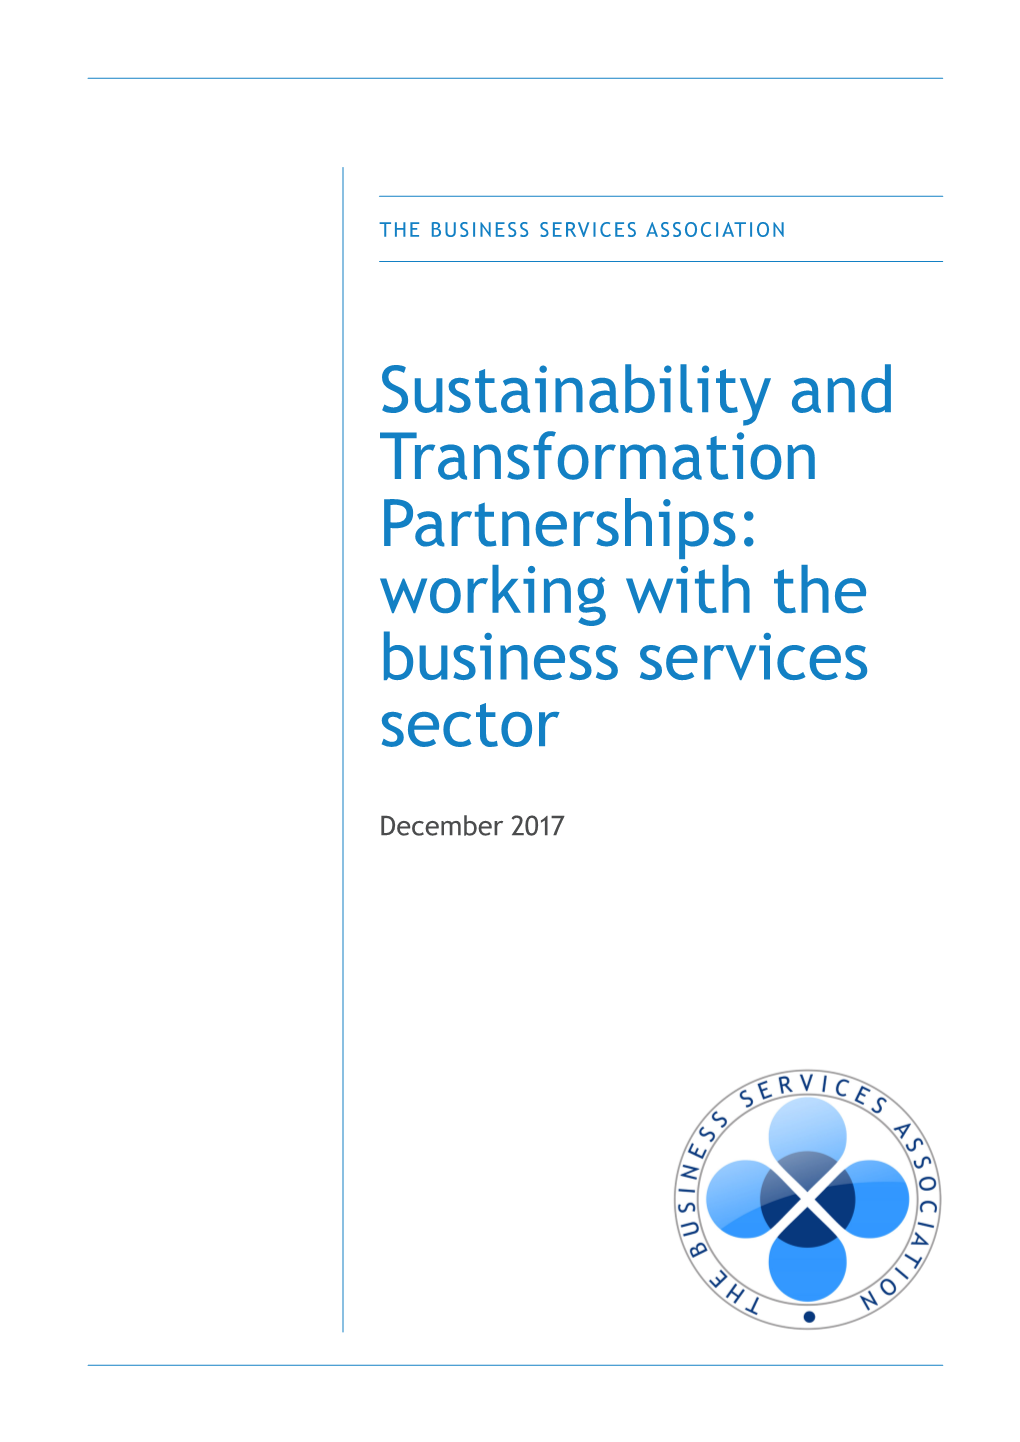 Sustainability and Transformation Partnerships: Working with the Business Services Sector